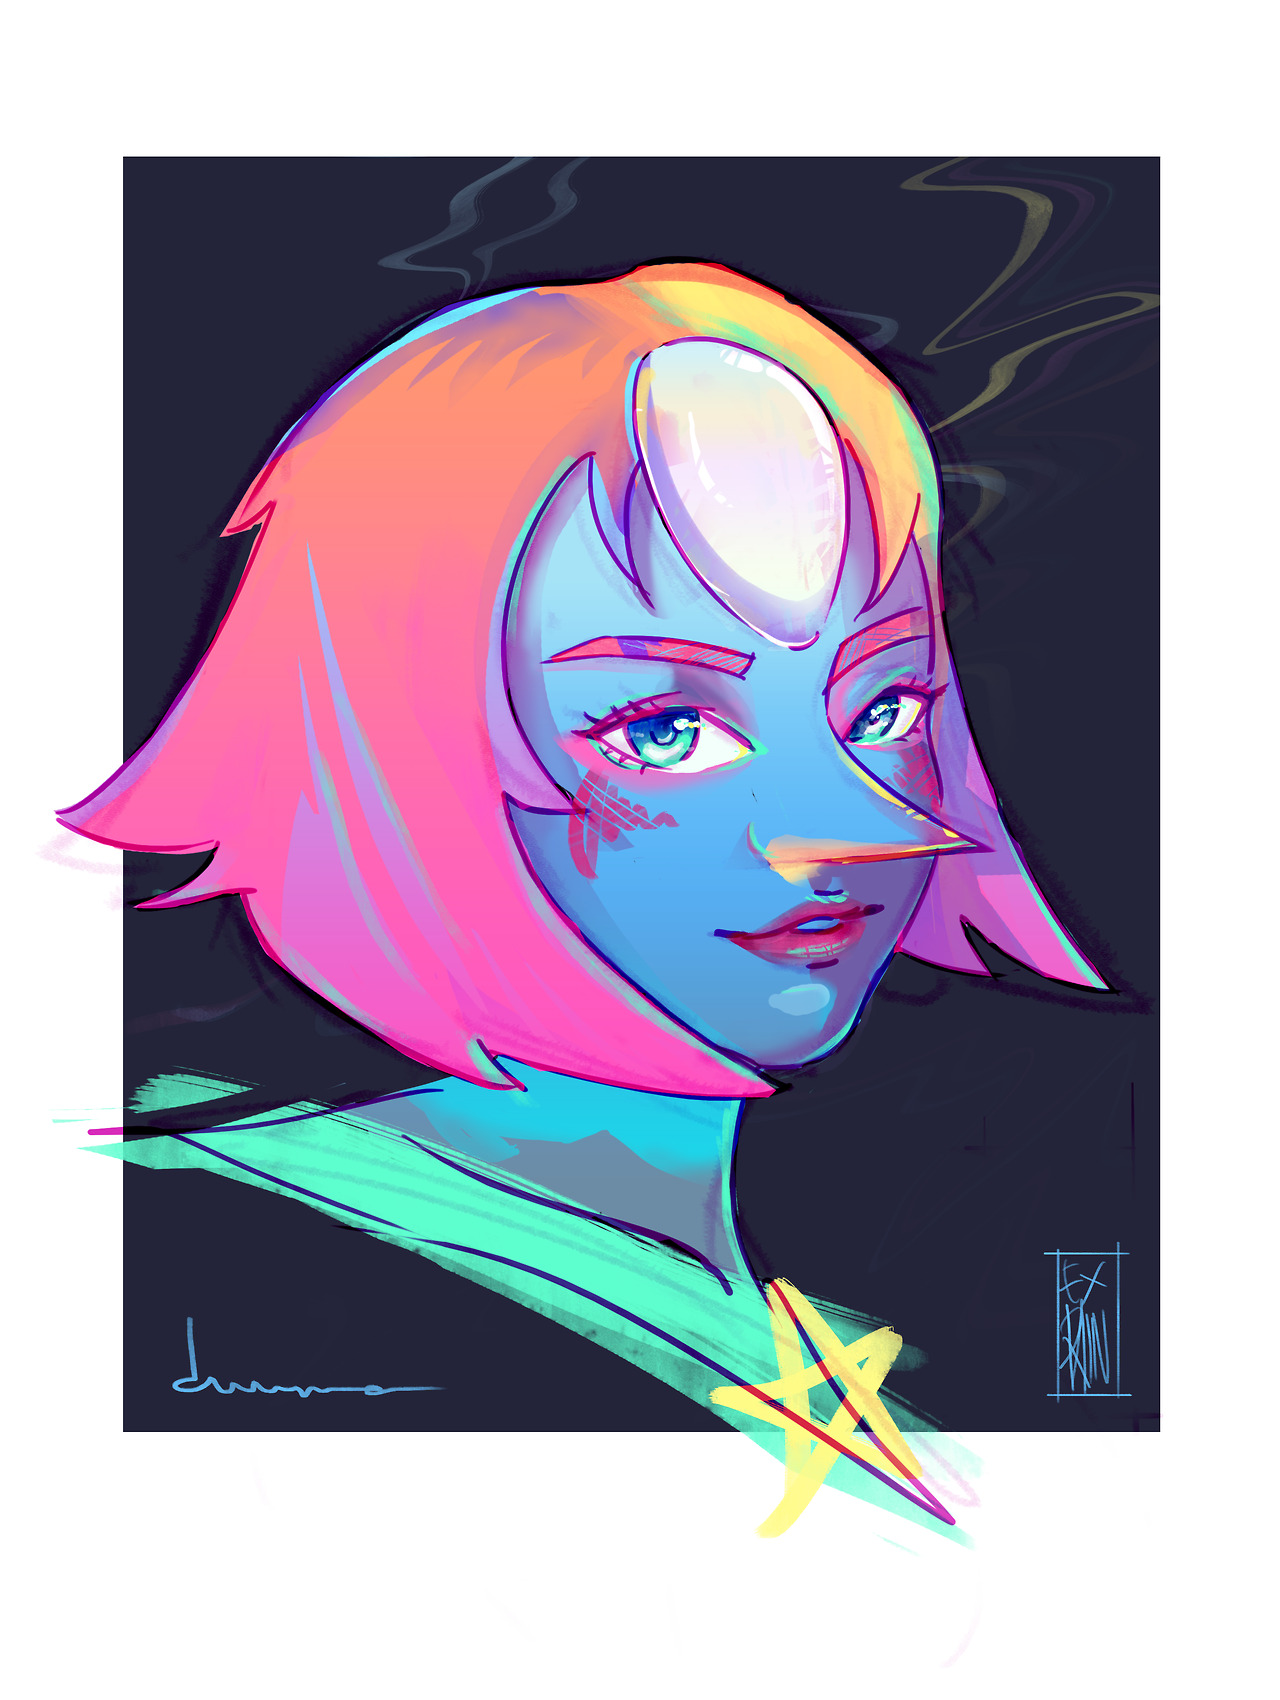 PEARL but with Pilot Pearl’s colour scheme. This is a ~collab~ with my cousin (instagram.com/exrainism). He drew the lineart and I painted her